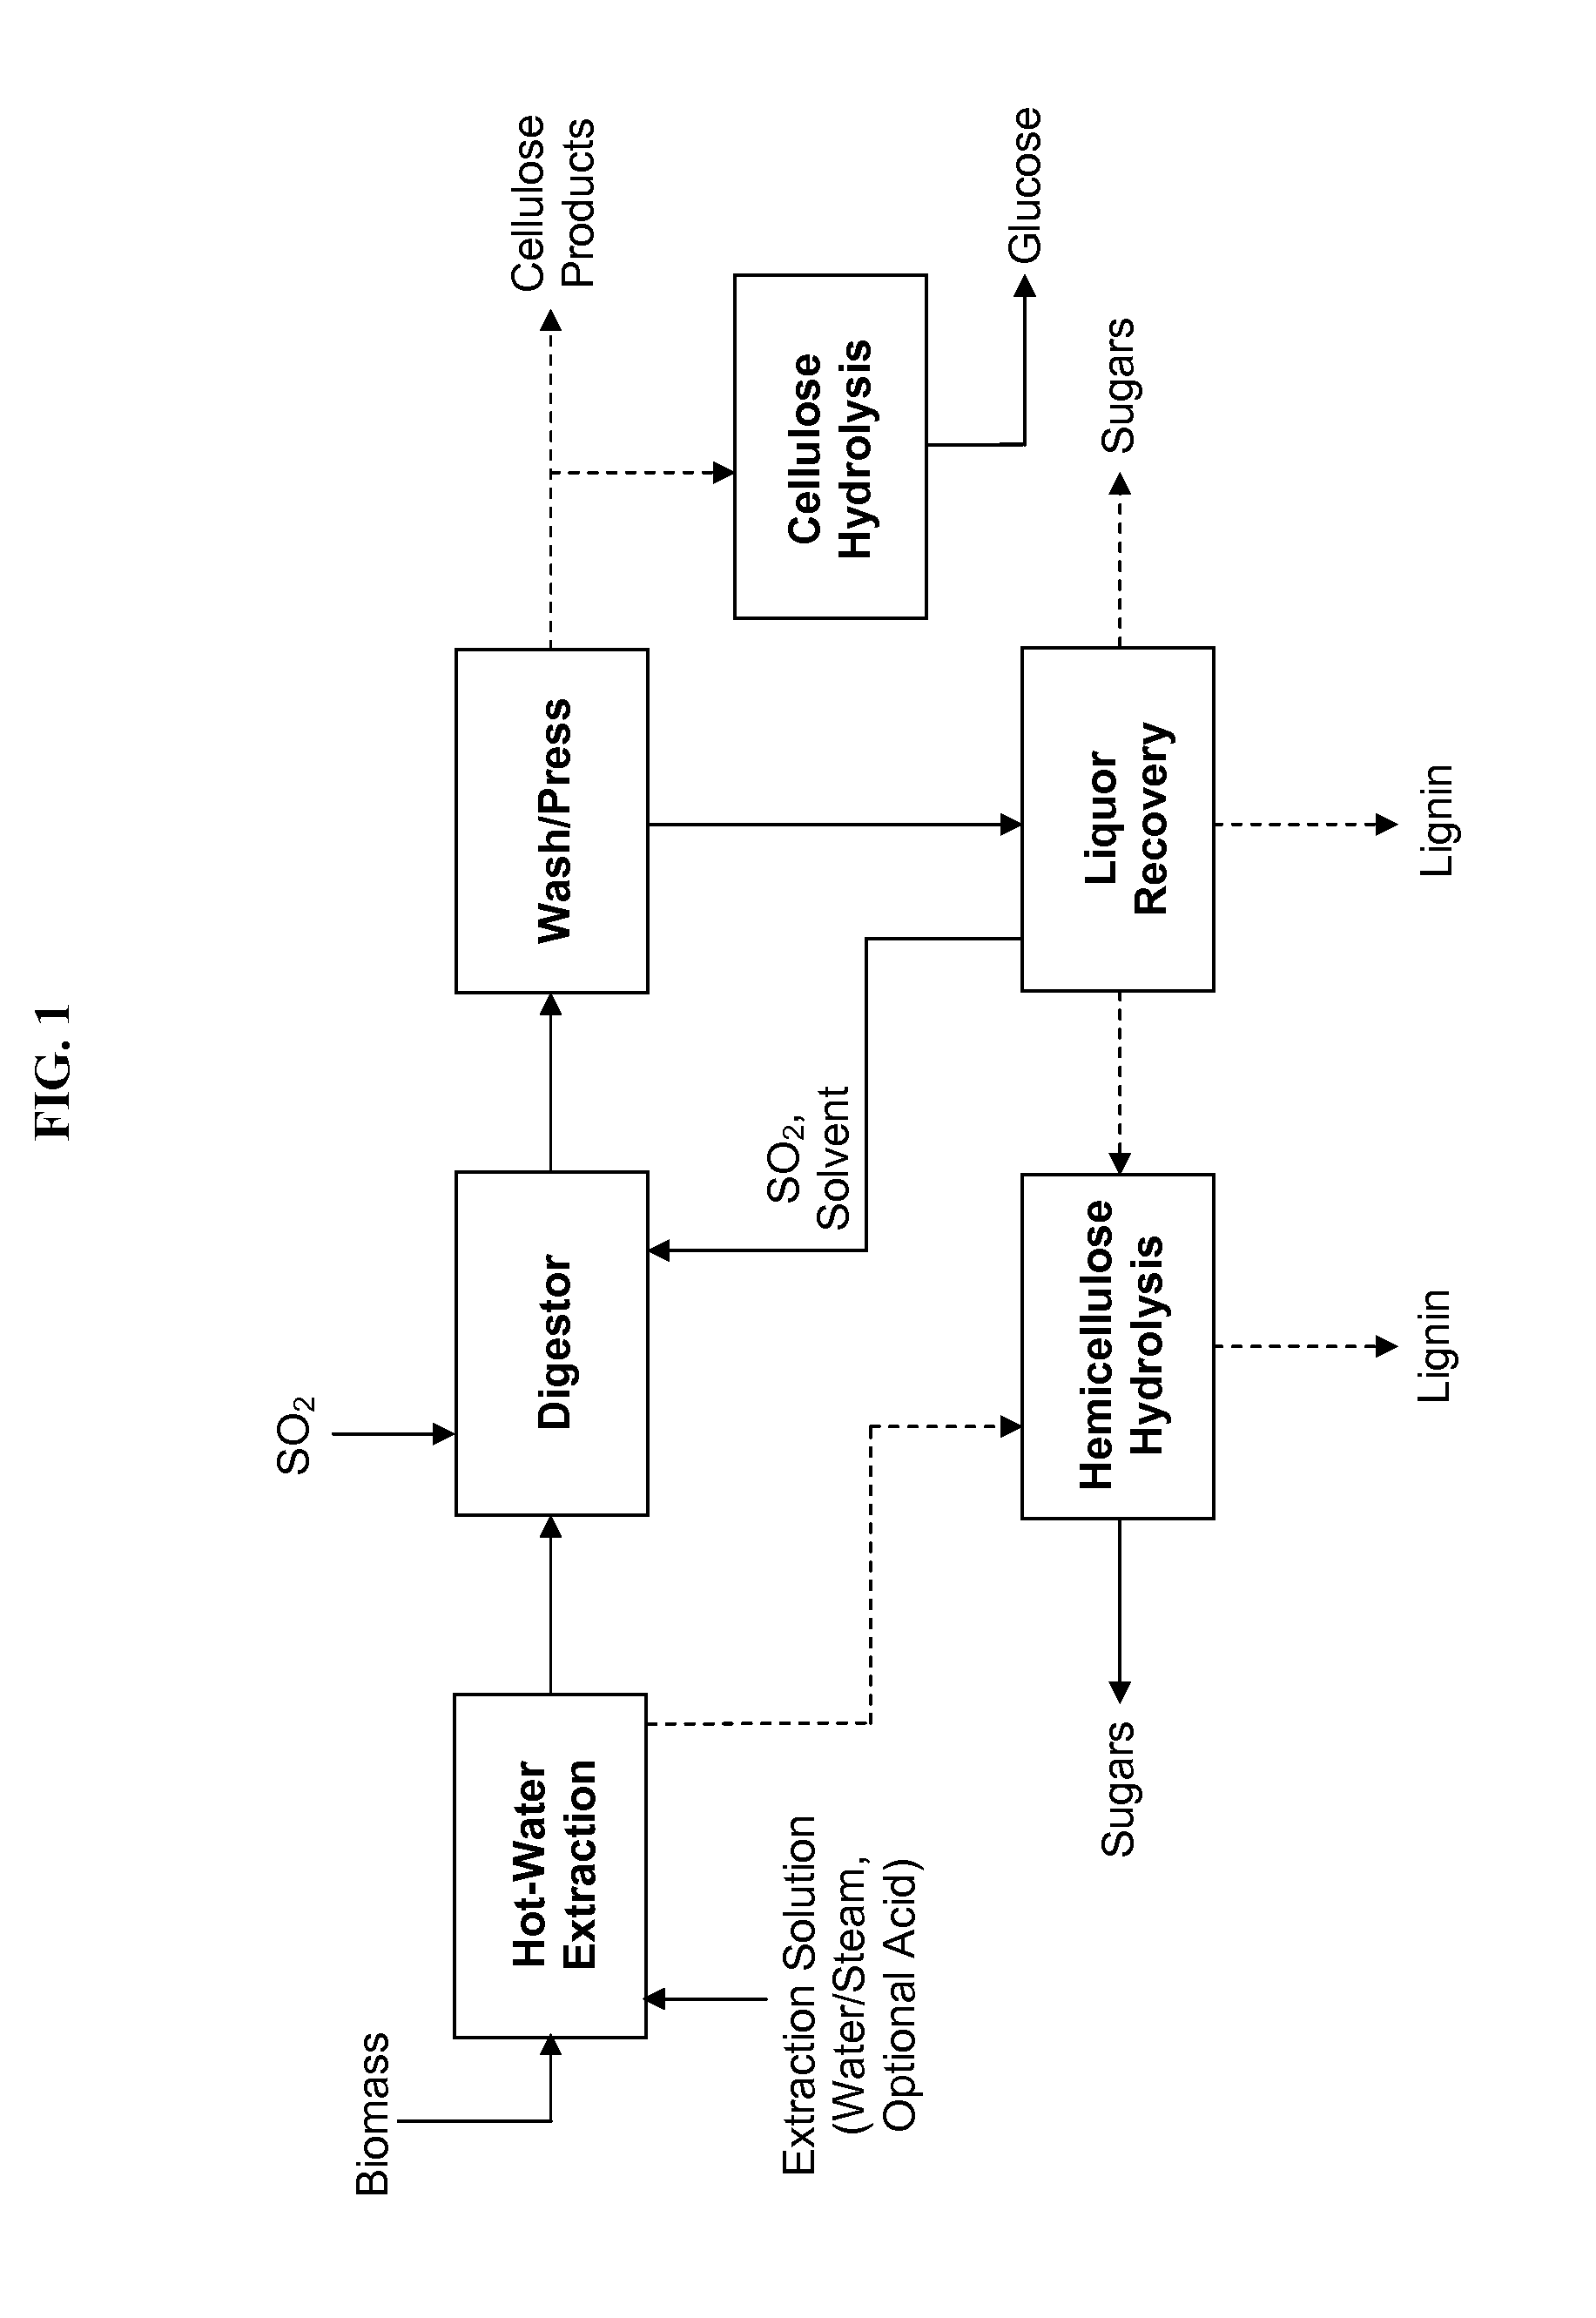 Biomass fractionation processes, apparatus, and products produced therefrom